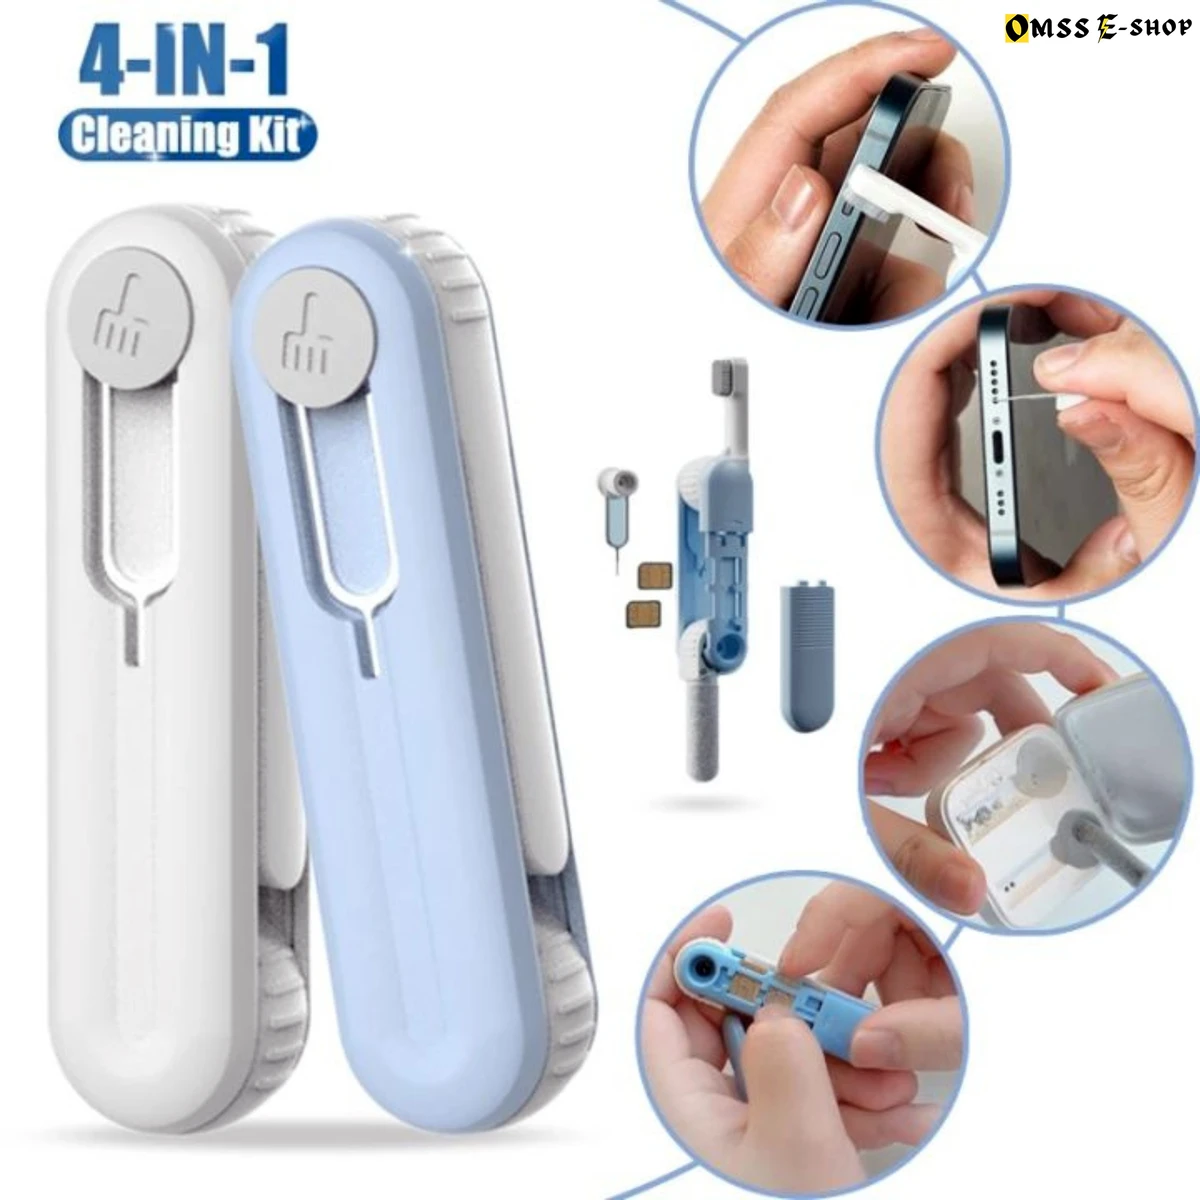 3-in-1 Computer Mobile Phone Cleaner Brush Electronics Clean Kit Portable Cleaning Tools for Monitor Earbuds Phone Laptop Earphone